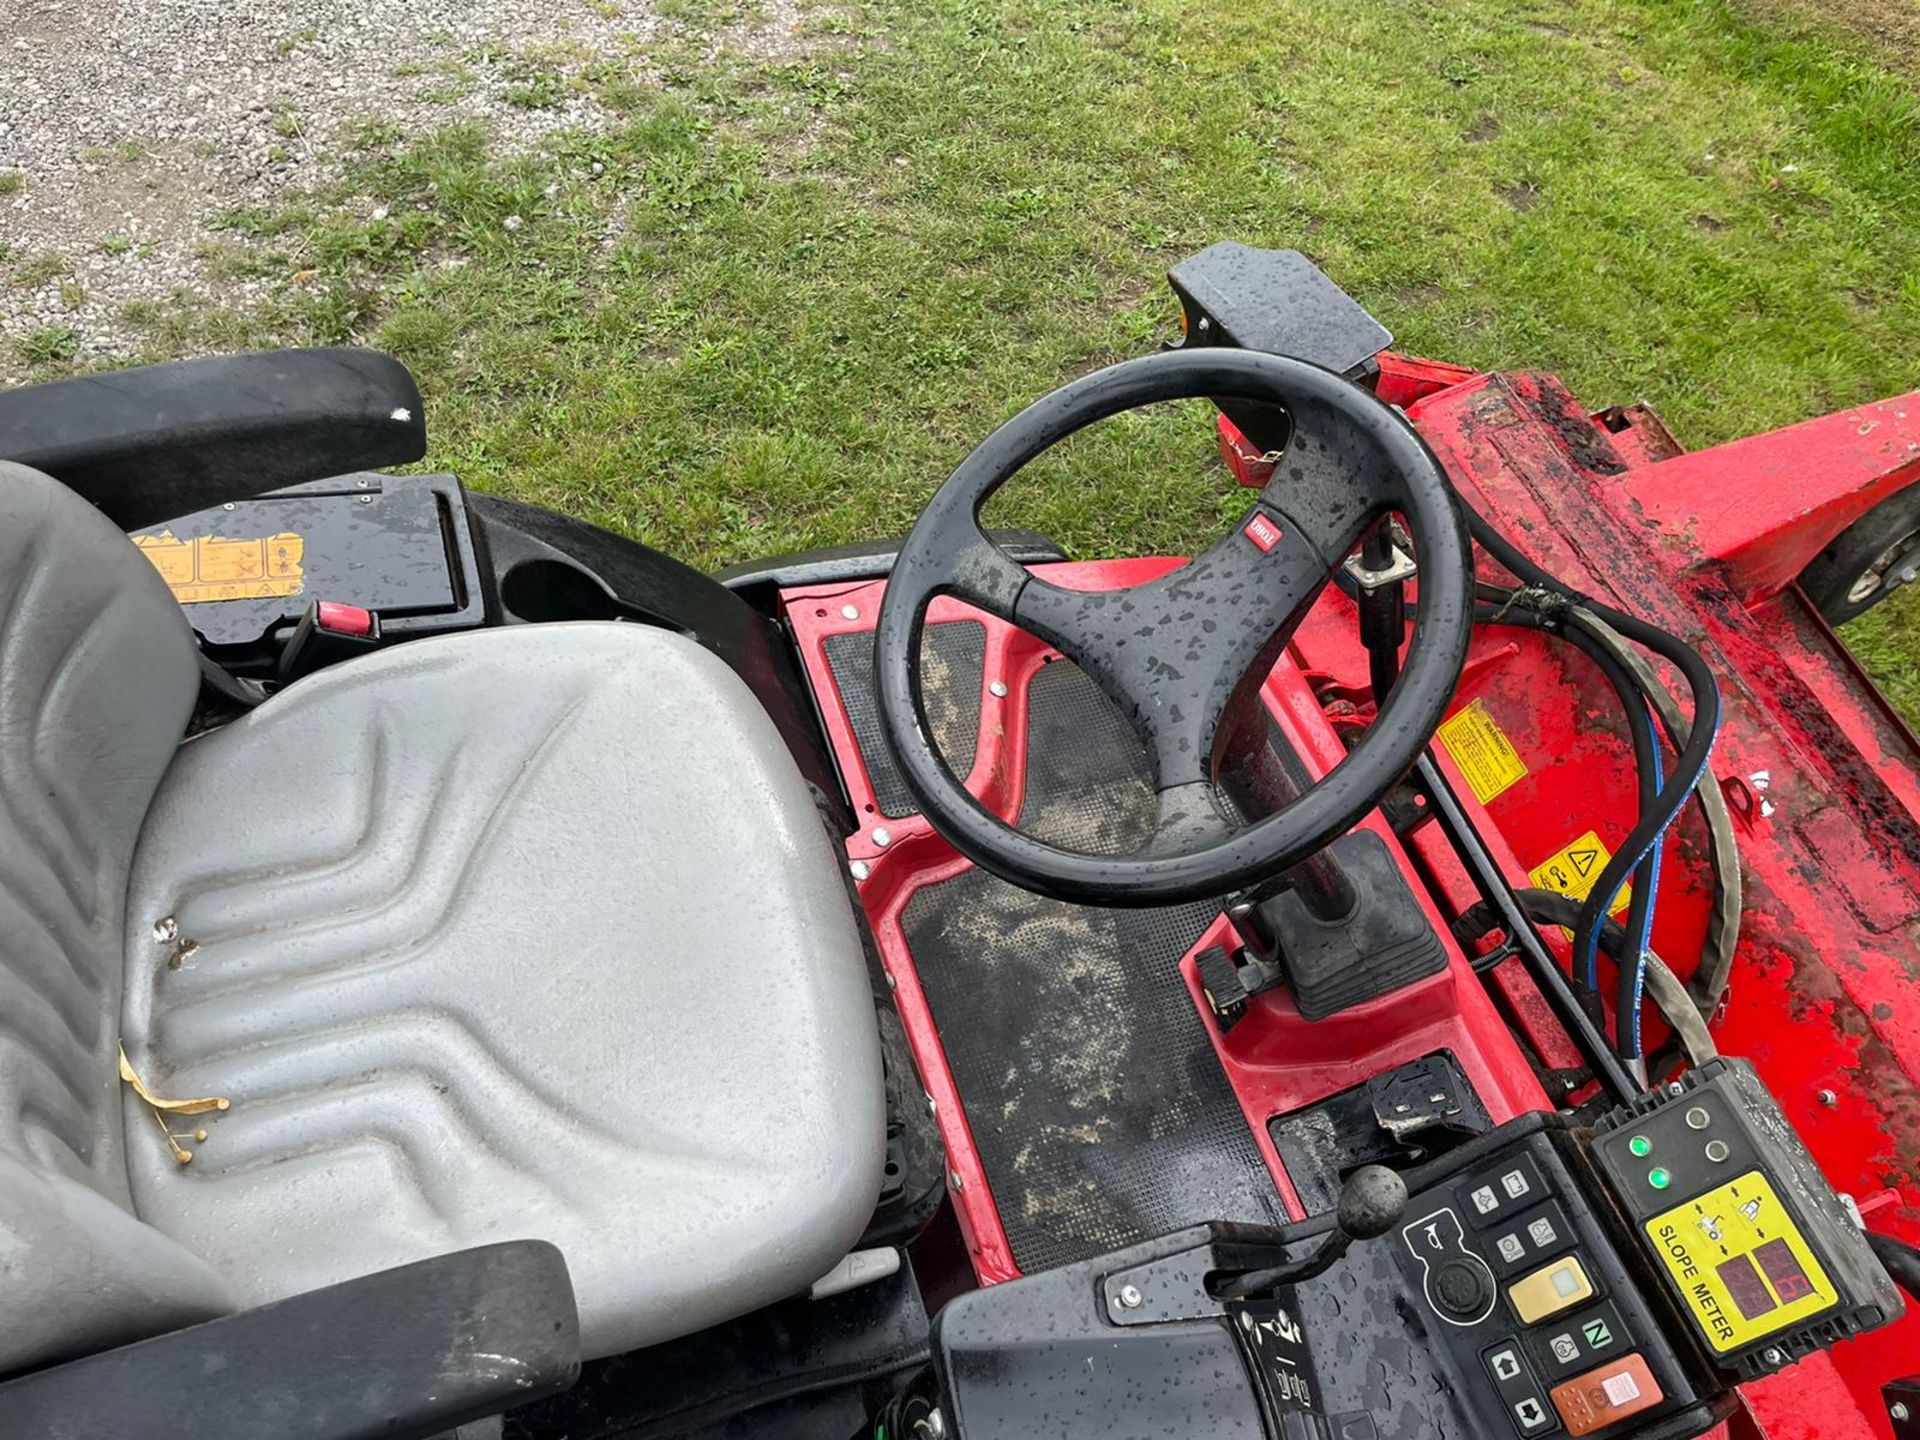 2015 TORO GM3400 4x4 RIDE ON MOWER, RUNS DRIVES CUTS WELL, A LOW AND GENUINE 2345 HOURS *PLUS VAT* - Image 10 of 17